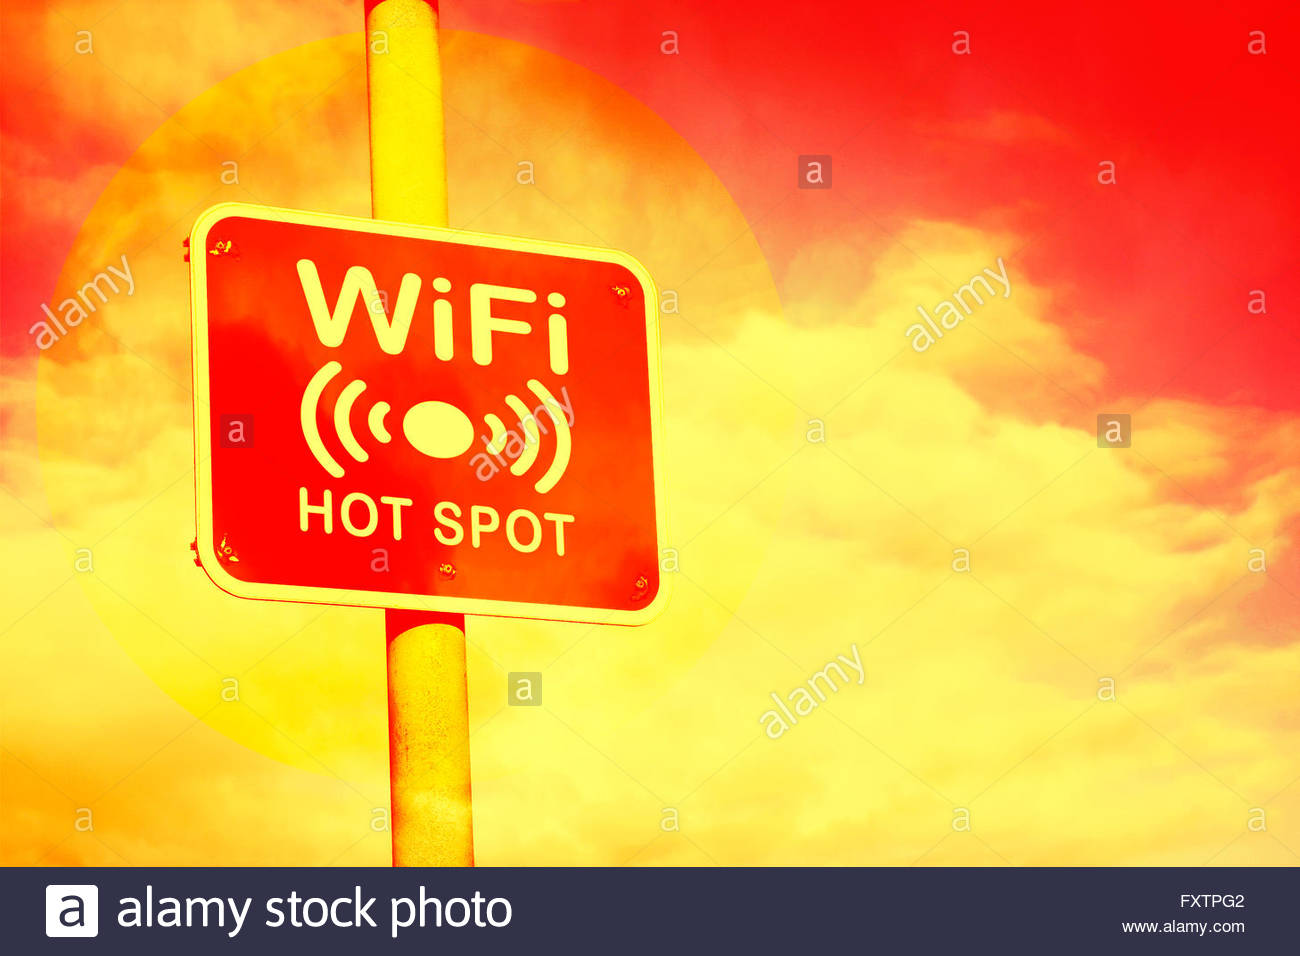 Wifi Hotspot Sign Against A Hot Red And Yellow Background Stock